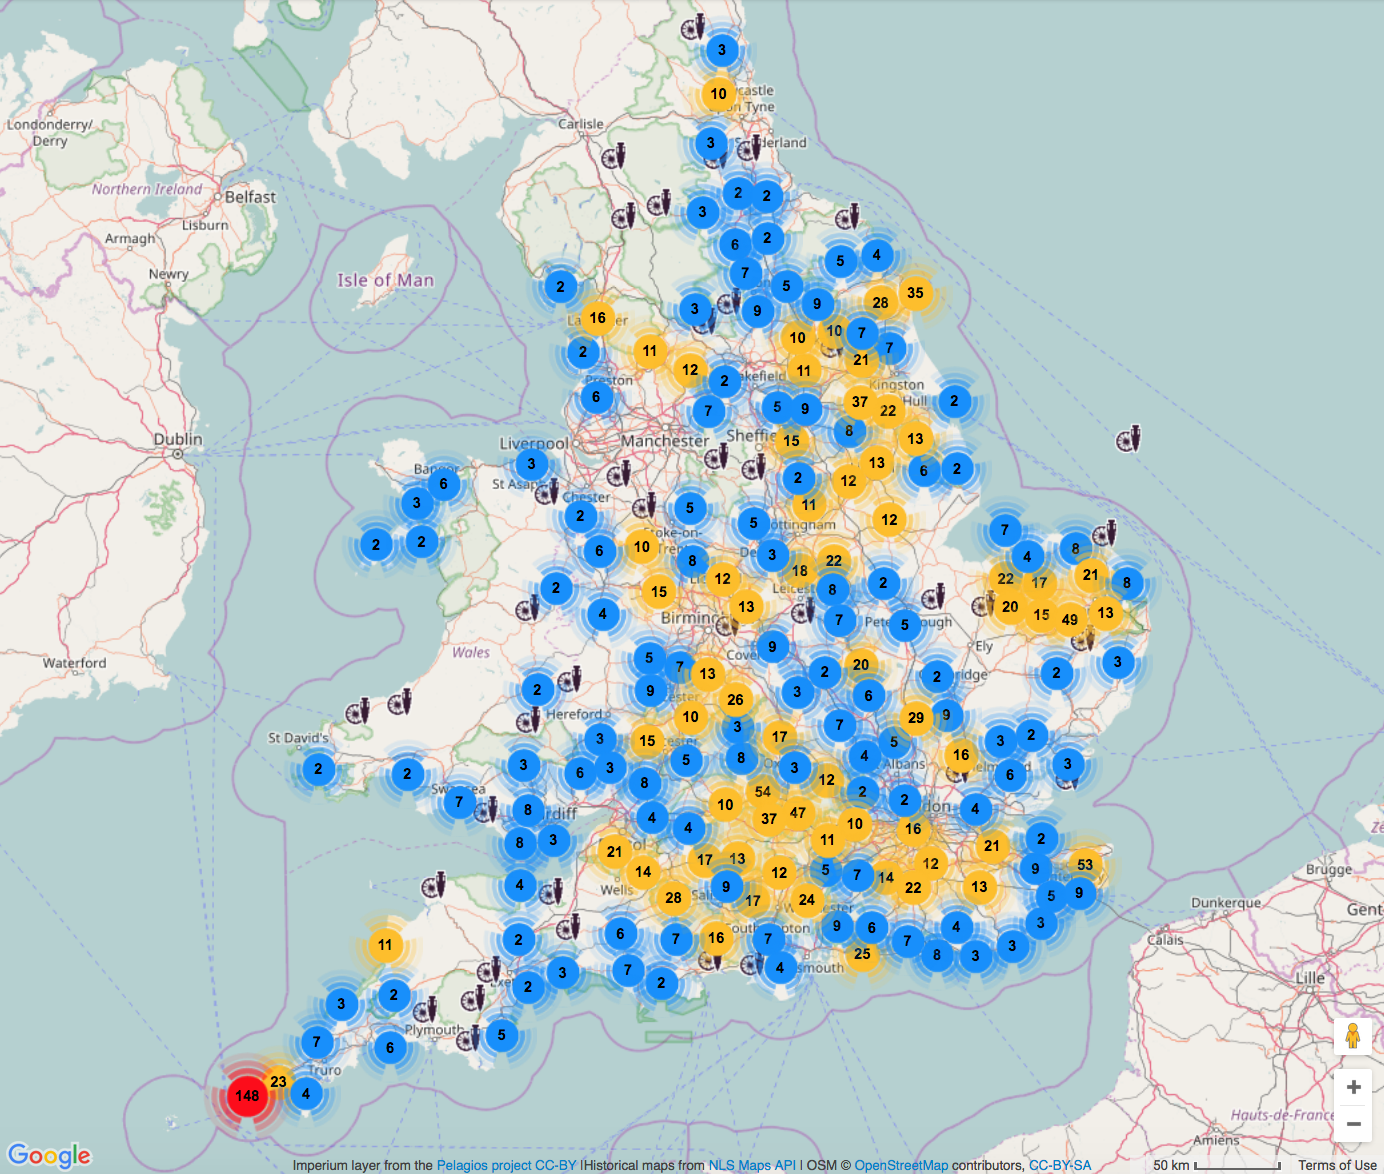 Bronze Age finds in England and Wales according to Portable Antiquities Scheme